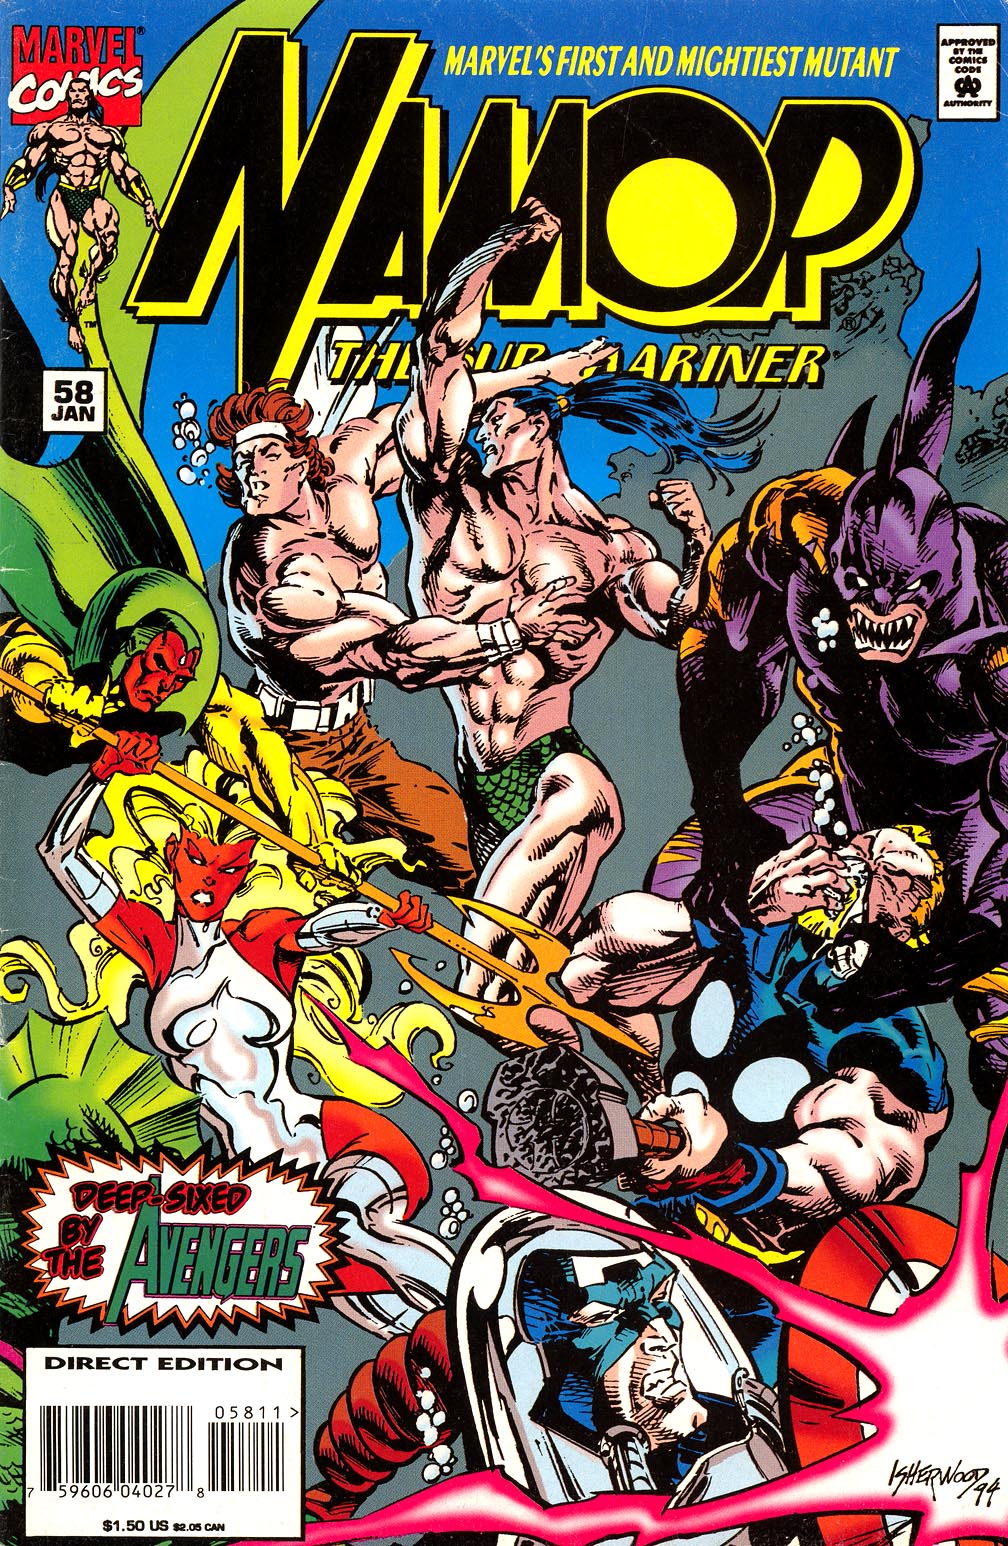 Read online Namor, The Sub-Mariner comic -  Issue #58 - 1